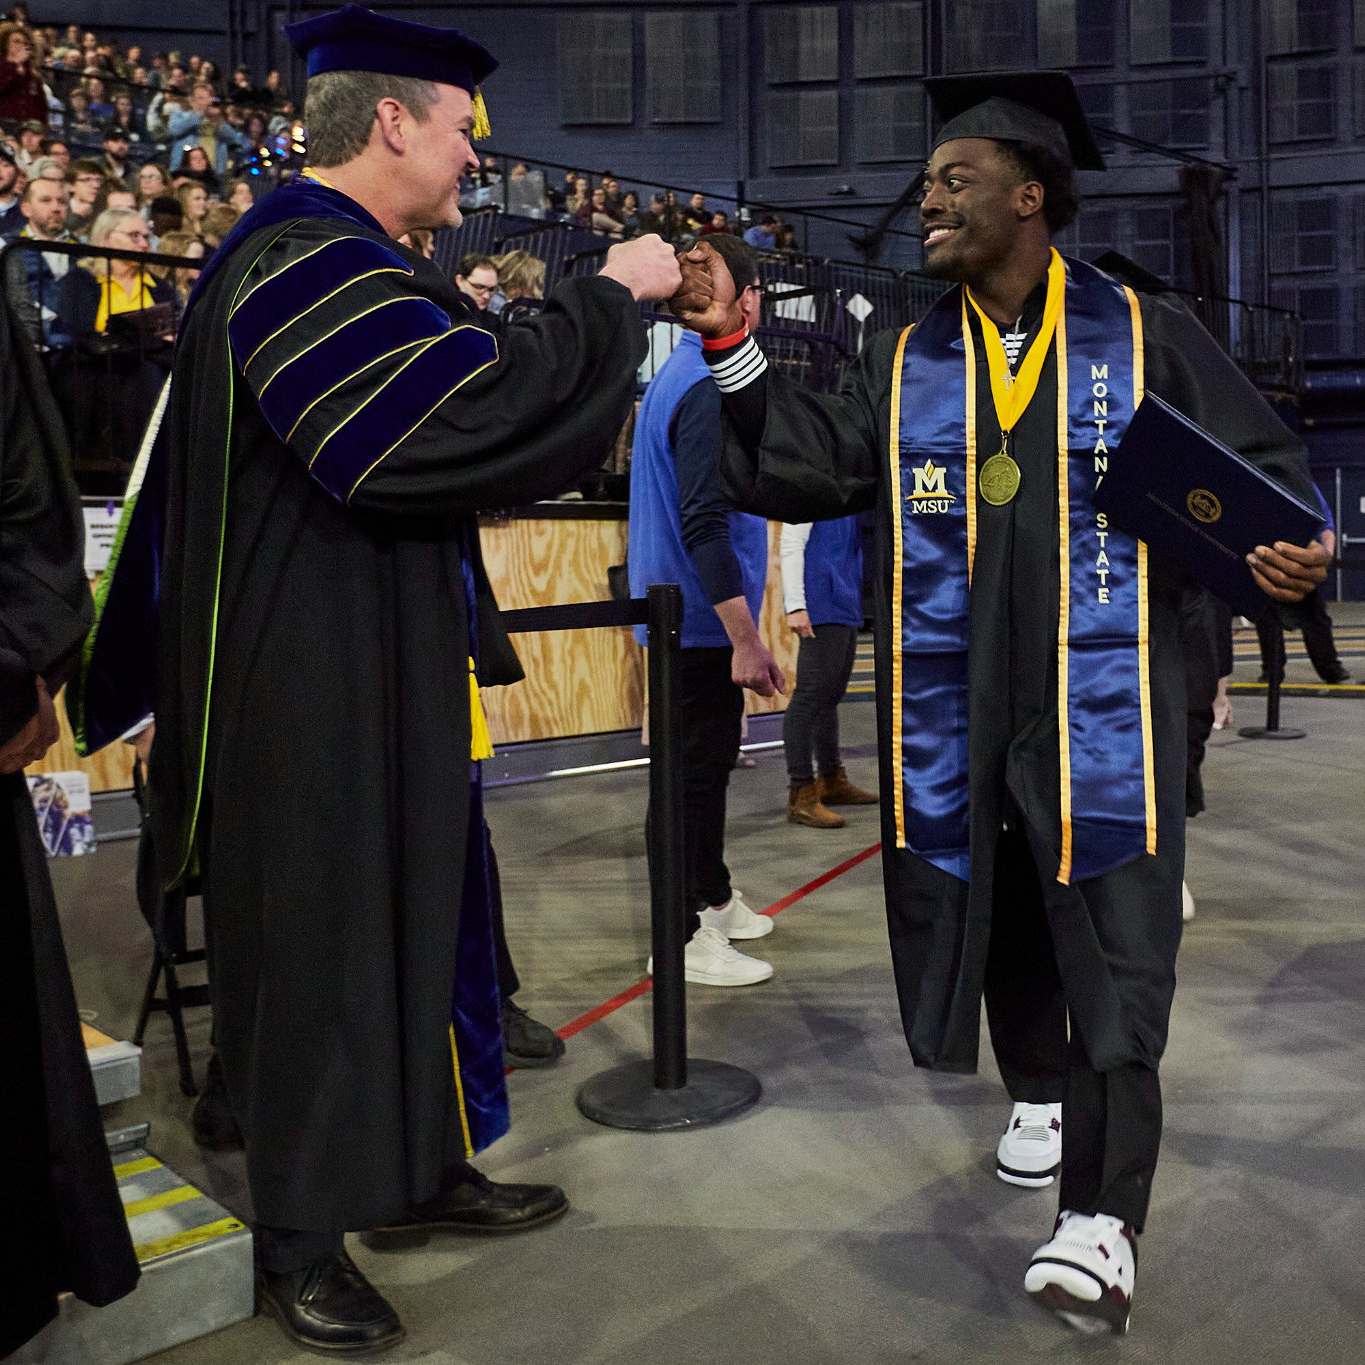 Student fist bumps a professor at MSU's Commencement Exercises in the Brick Breeden Fieldhouse